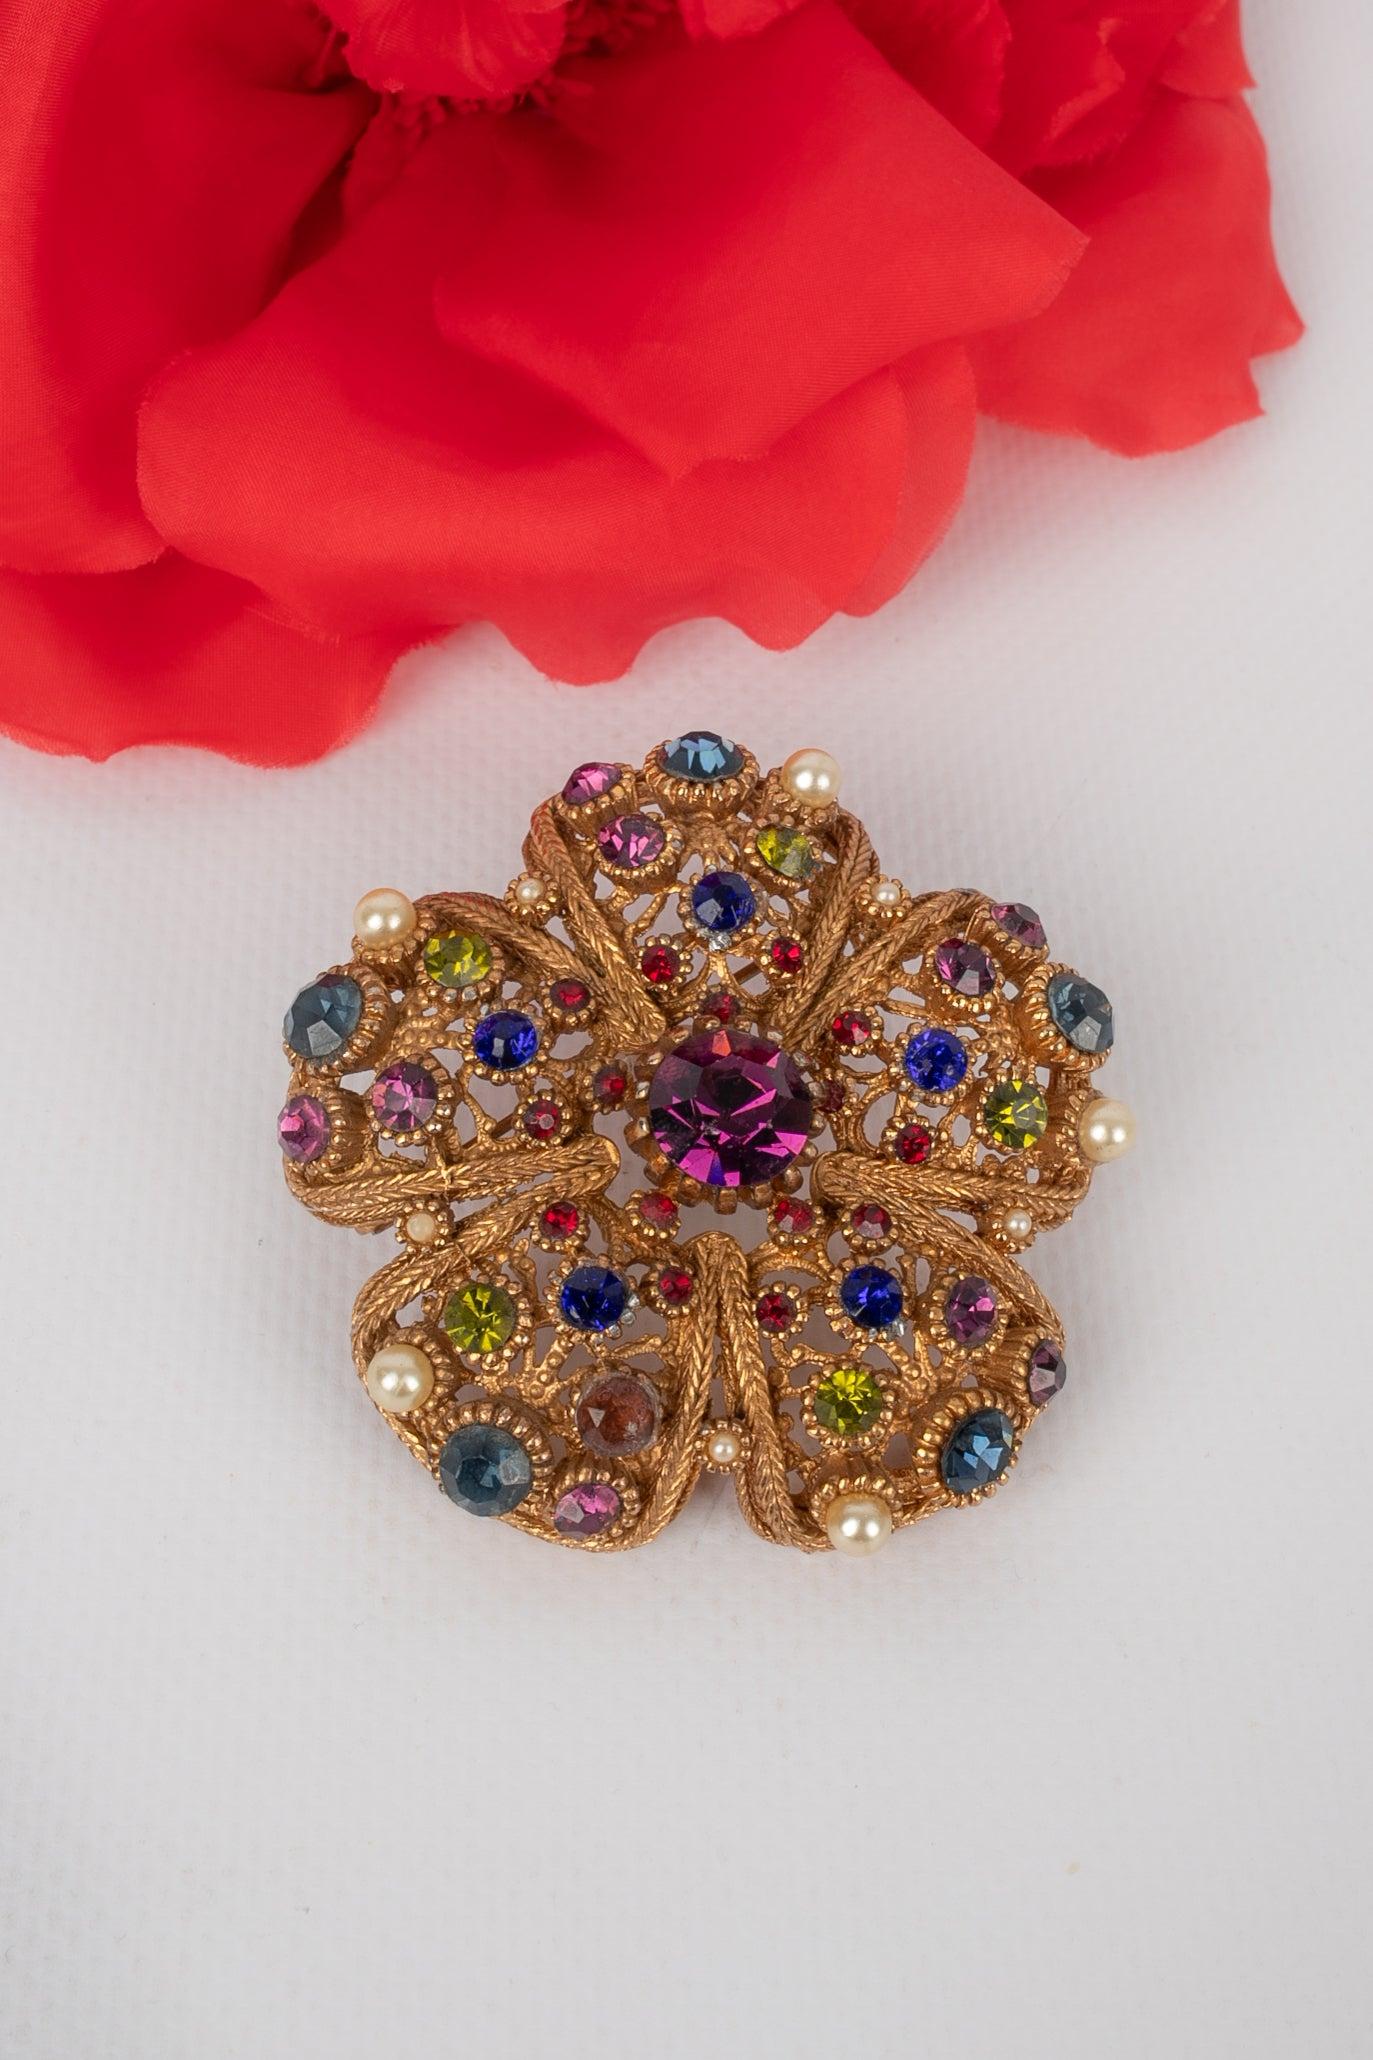 Nina Ricci Flower Brooch with Colored Rhinestones and Pearls For Sale 3